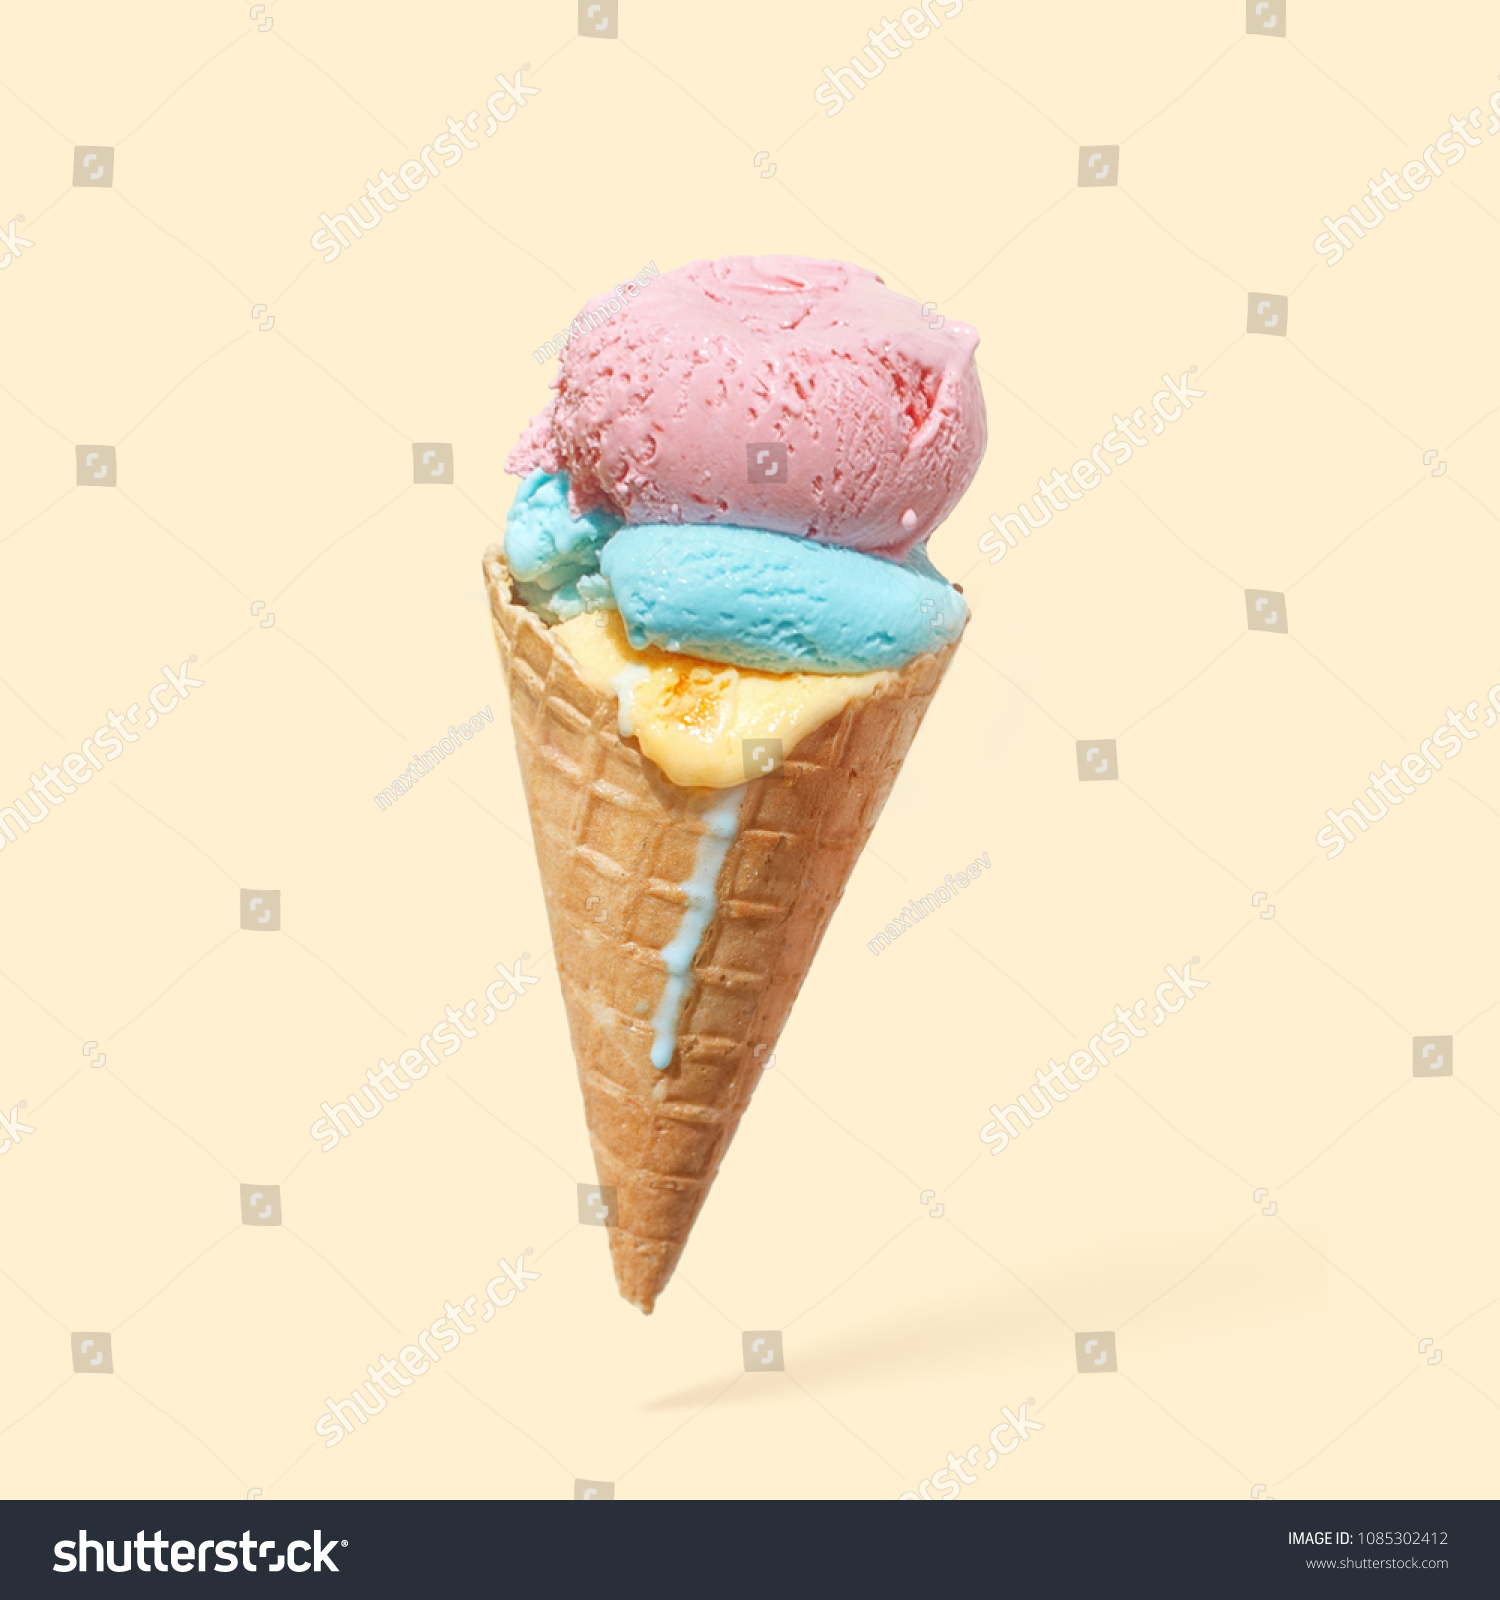 Download Cone Colorful Ice Cream On Yellow Food And Drink Stock Image 1085302412 Yellowimages Mockups